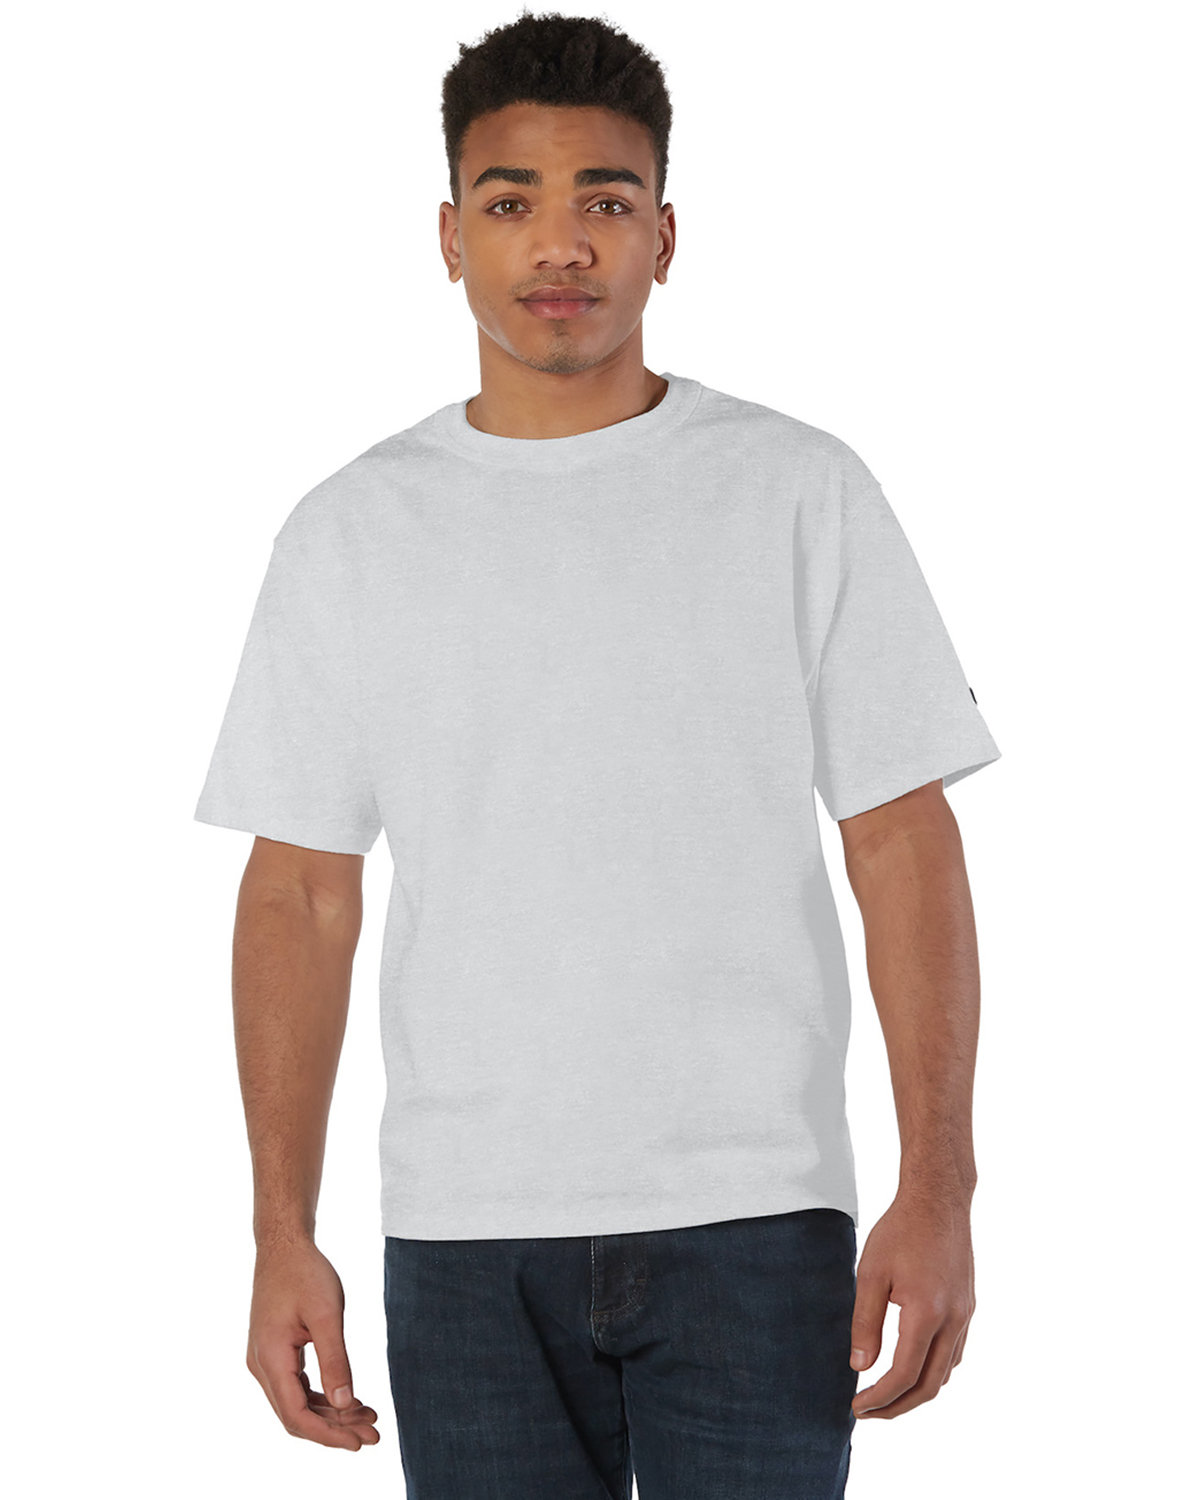 Champion Adult 7 oz. Heritage Jersey T-Shirt SILVER GRAY 